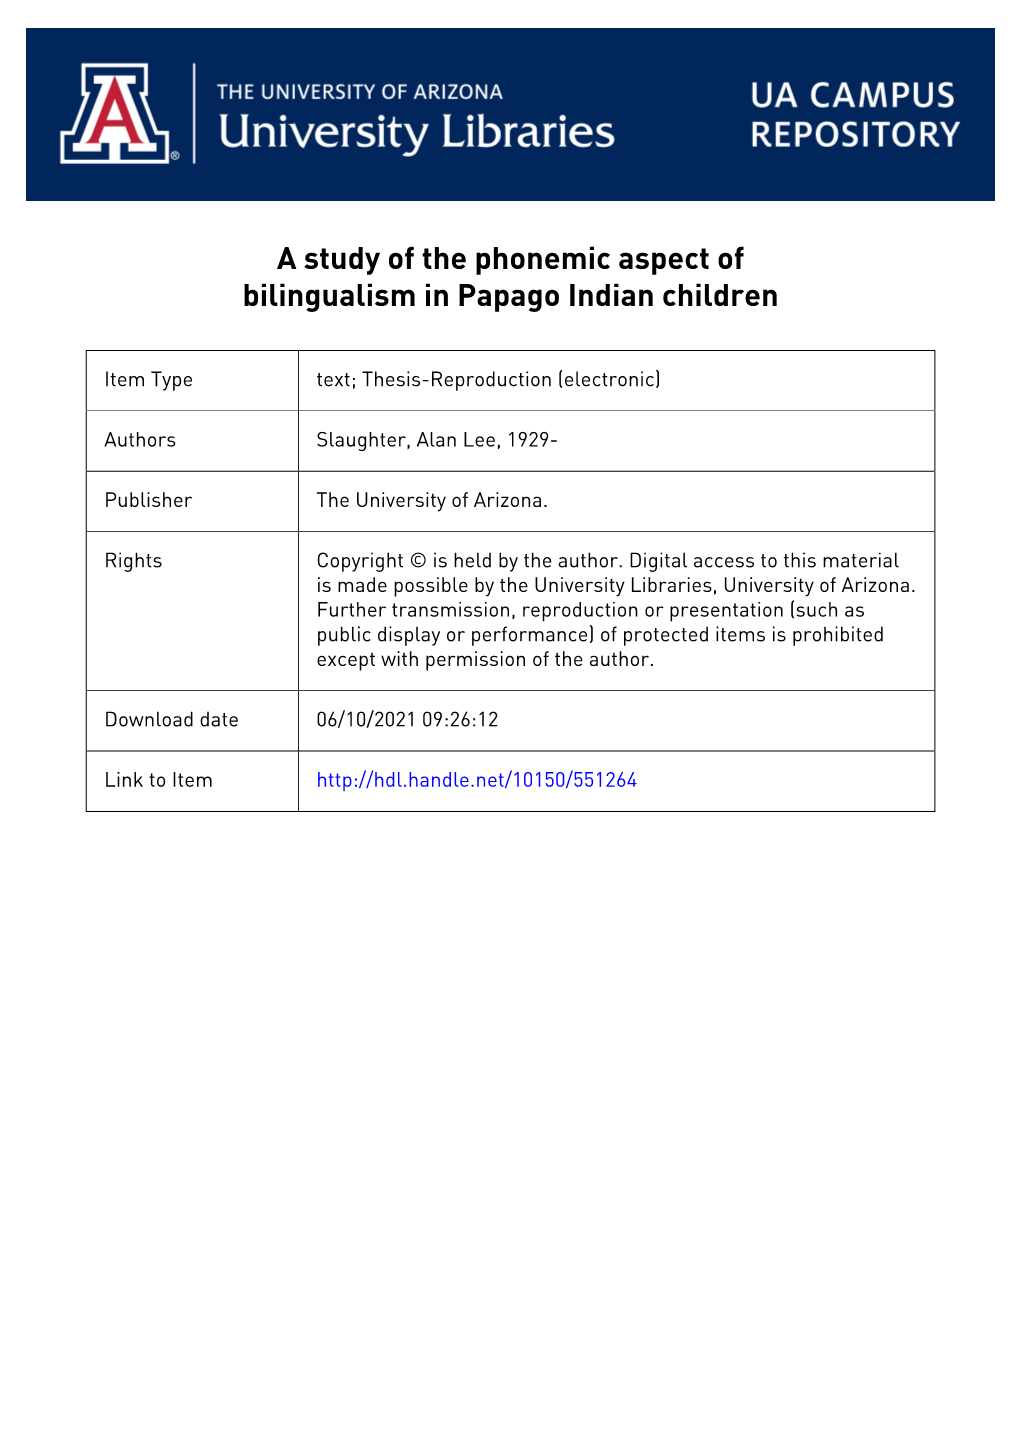 A Study of the Phonemic Aspect of Bilingualism in Papago Indian Children